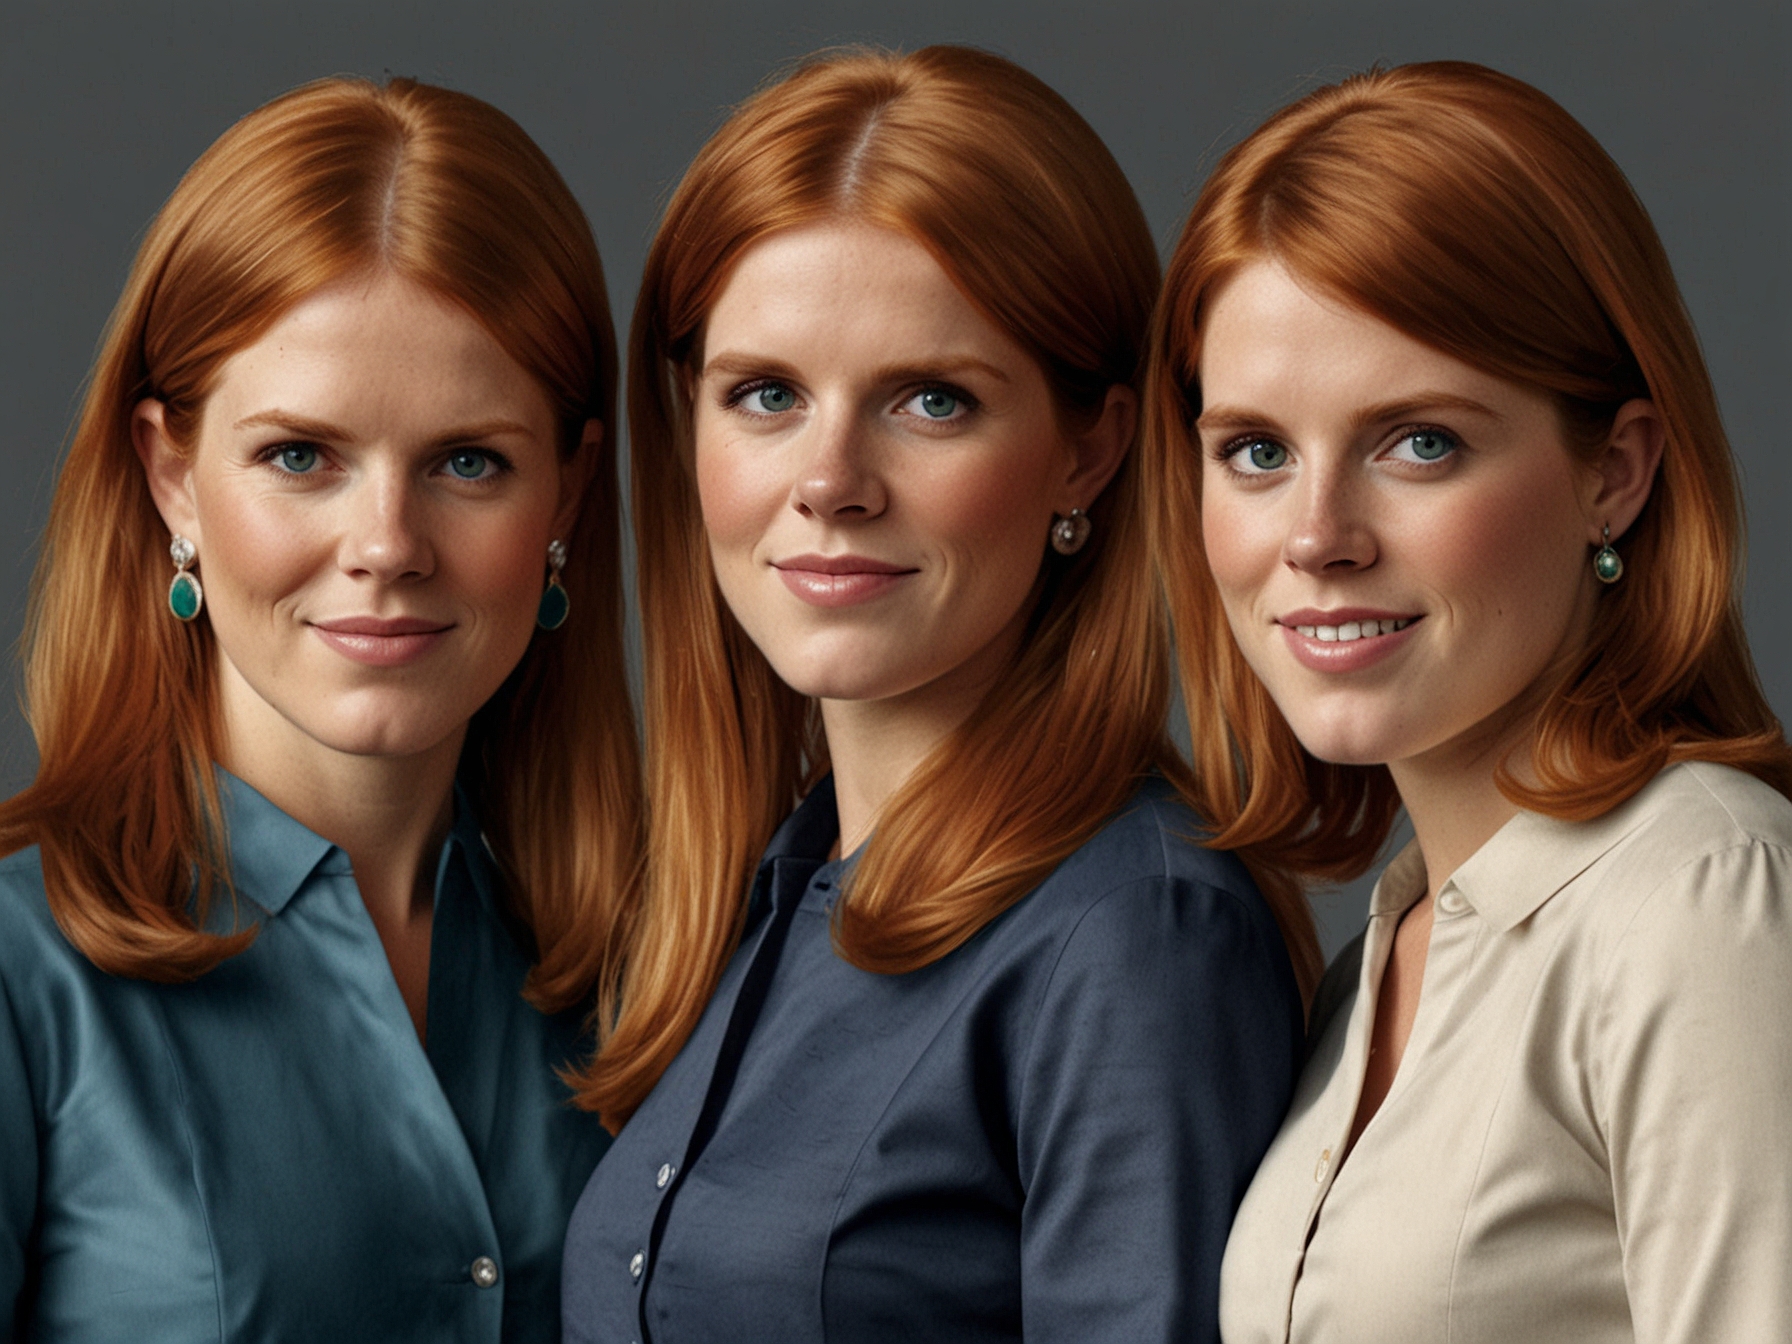 Sarah Ferguson with her daughters, Princess Beatrice and Princess Eugenie, showing close family ties. Both daughters are married with children, highlighting a new generation's positive image.